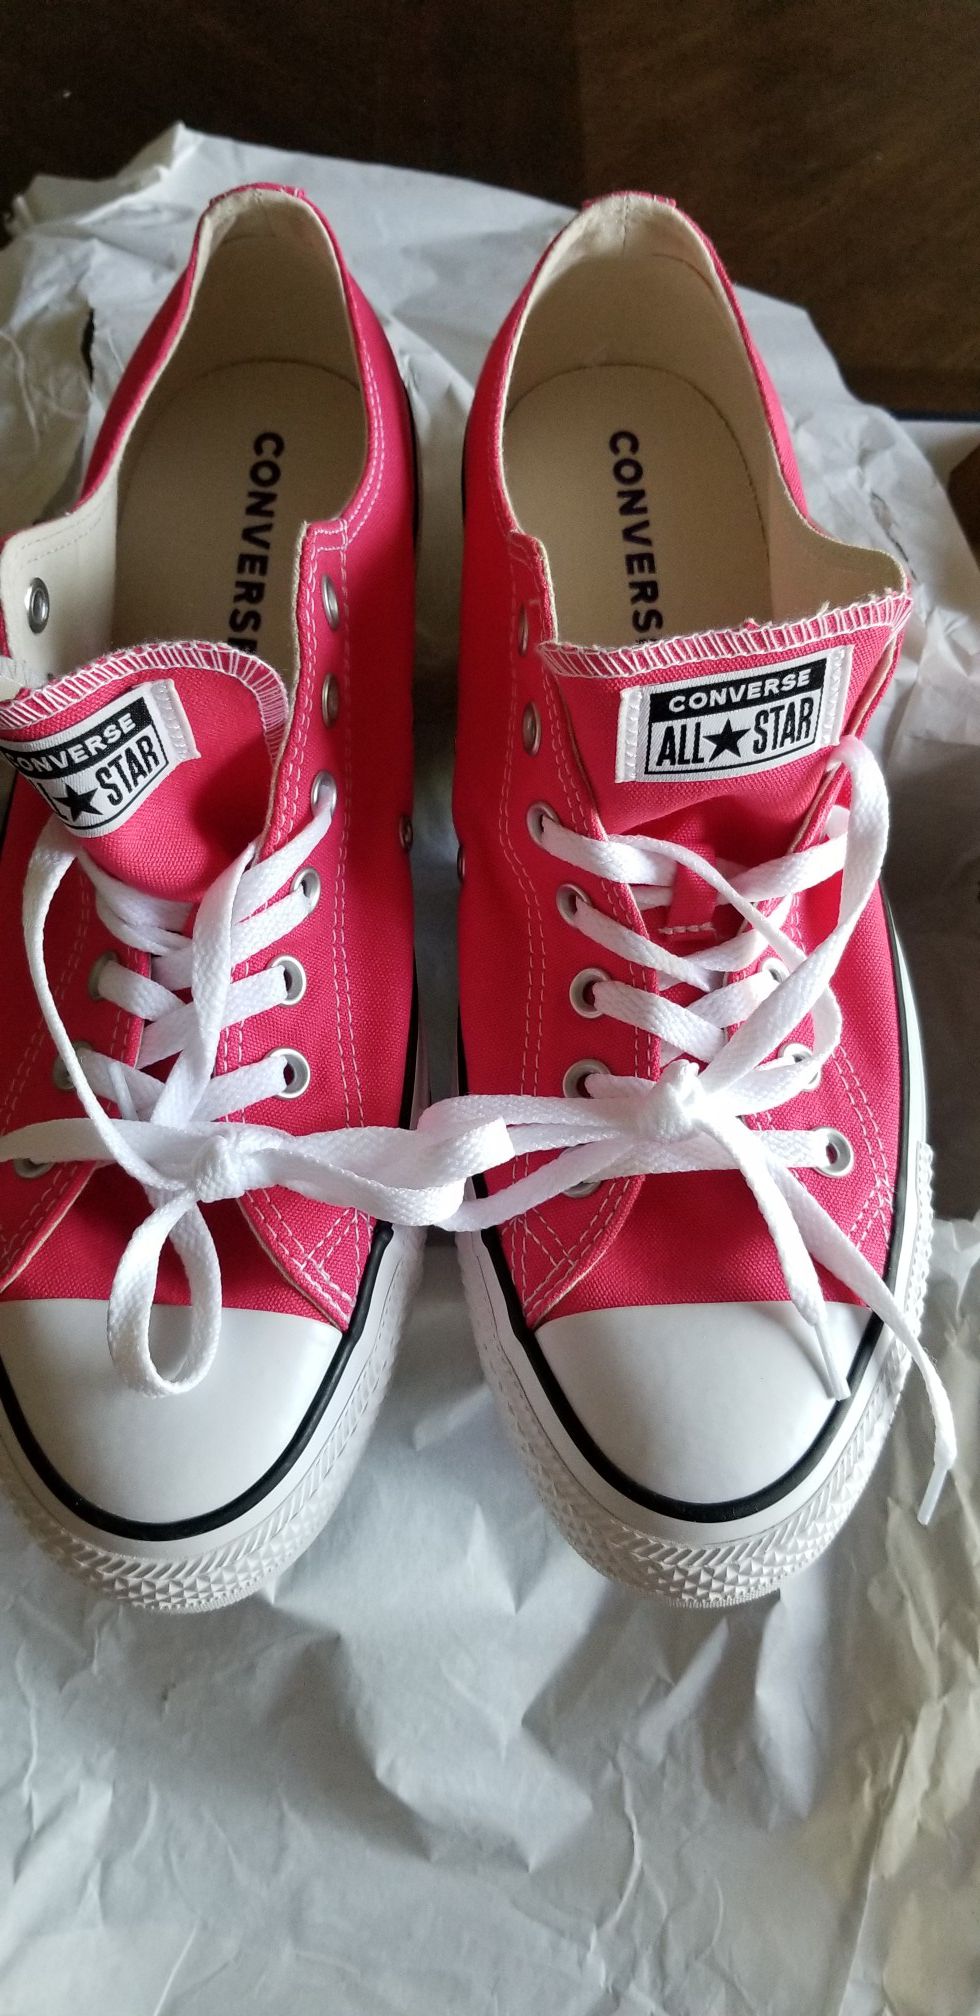 Converse Strawberry Jam Sneakers for Sale in Mount Township, NJ - OfferUp